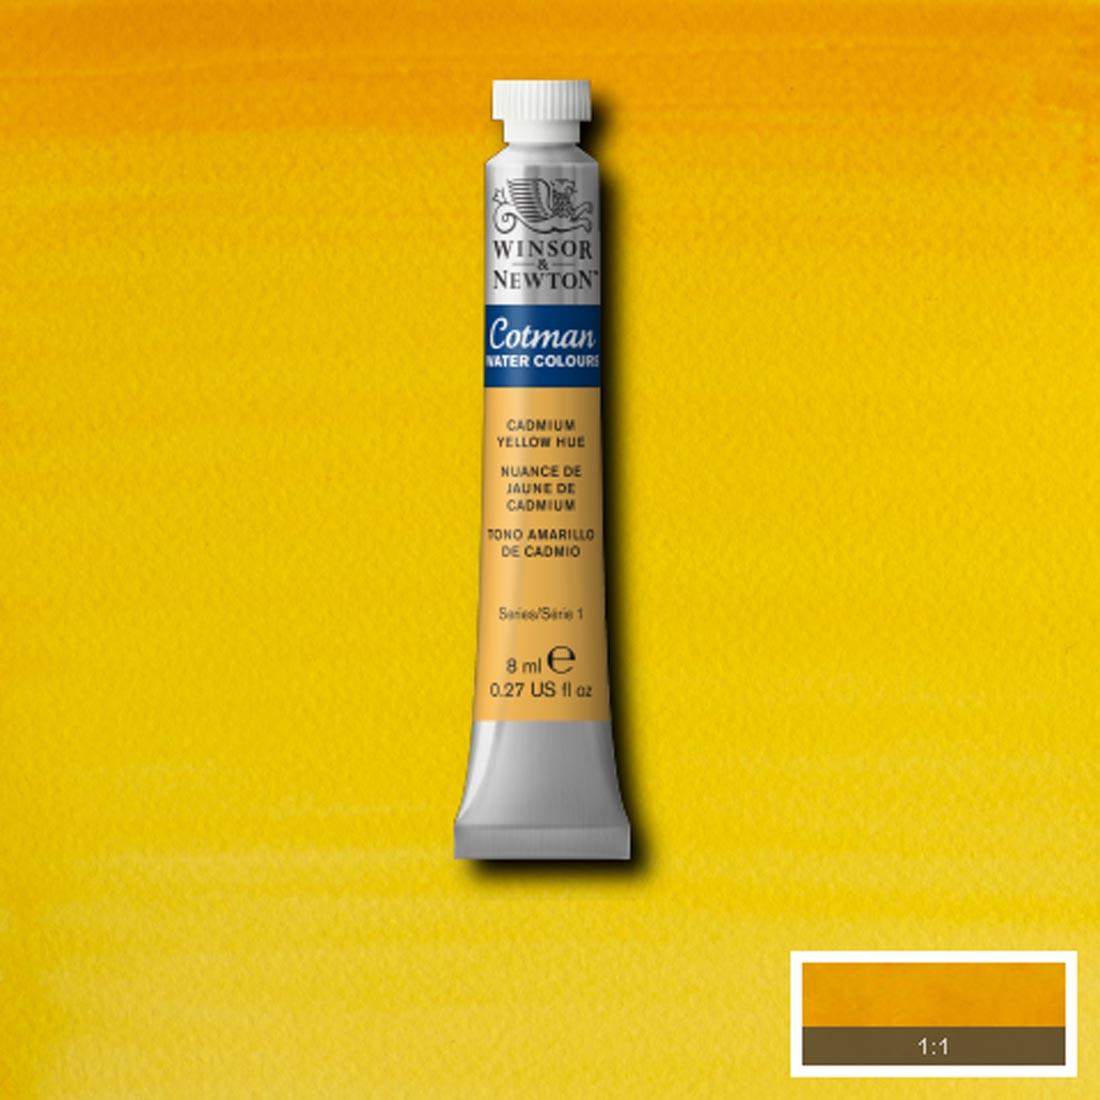 Tube of Cadmium Yellow Hue Winsor and Newton Cotman Water Colour with a paint swatch for the background